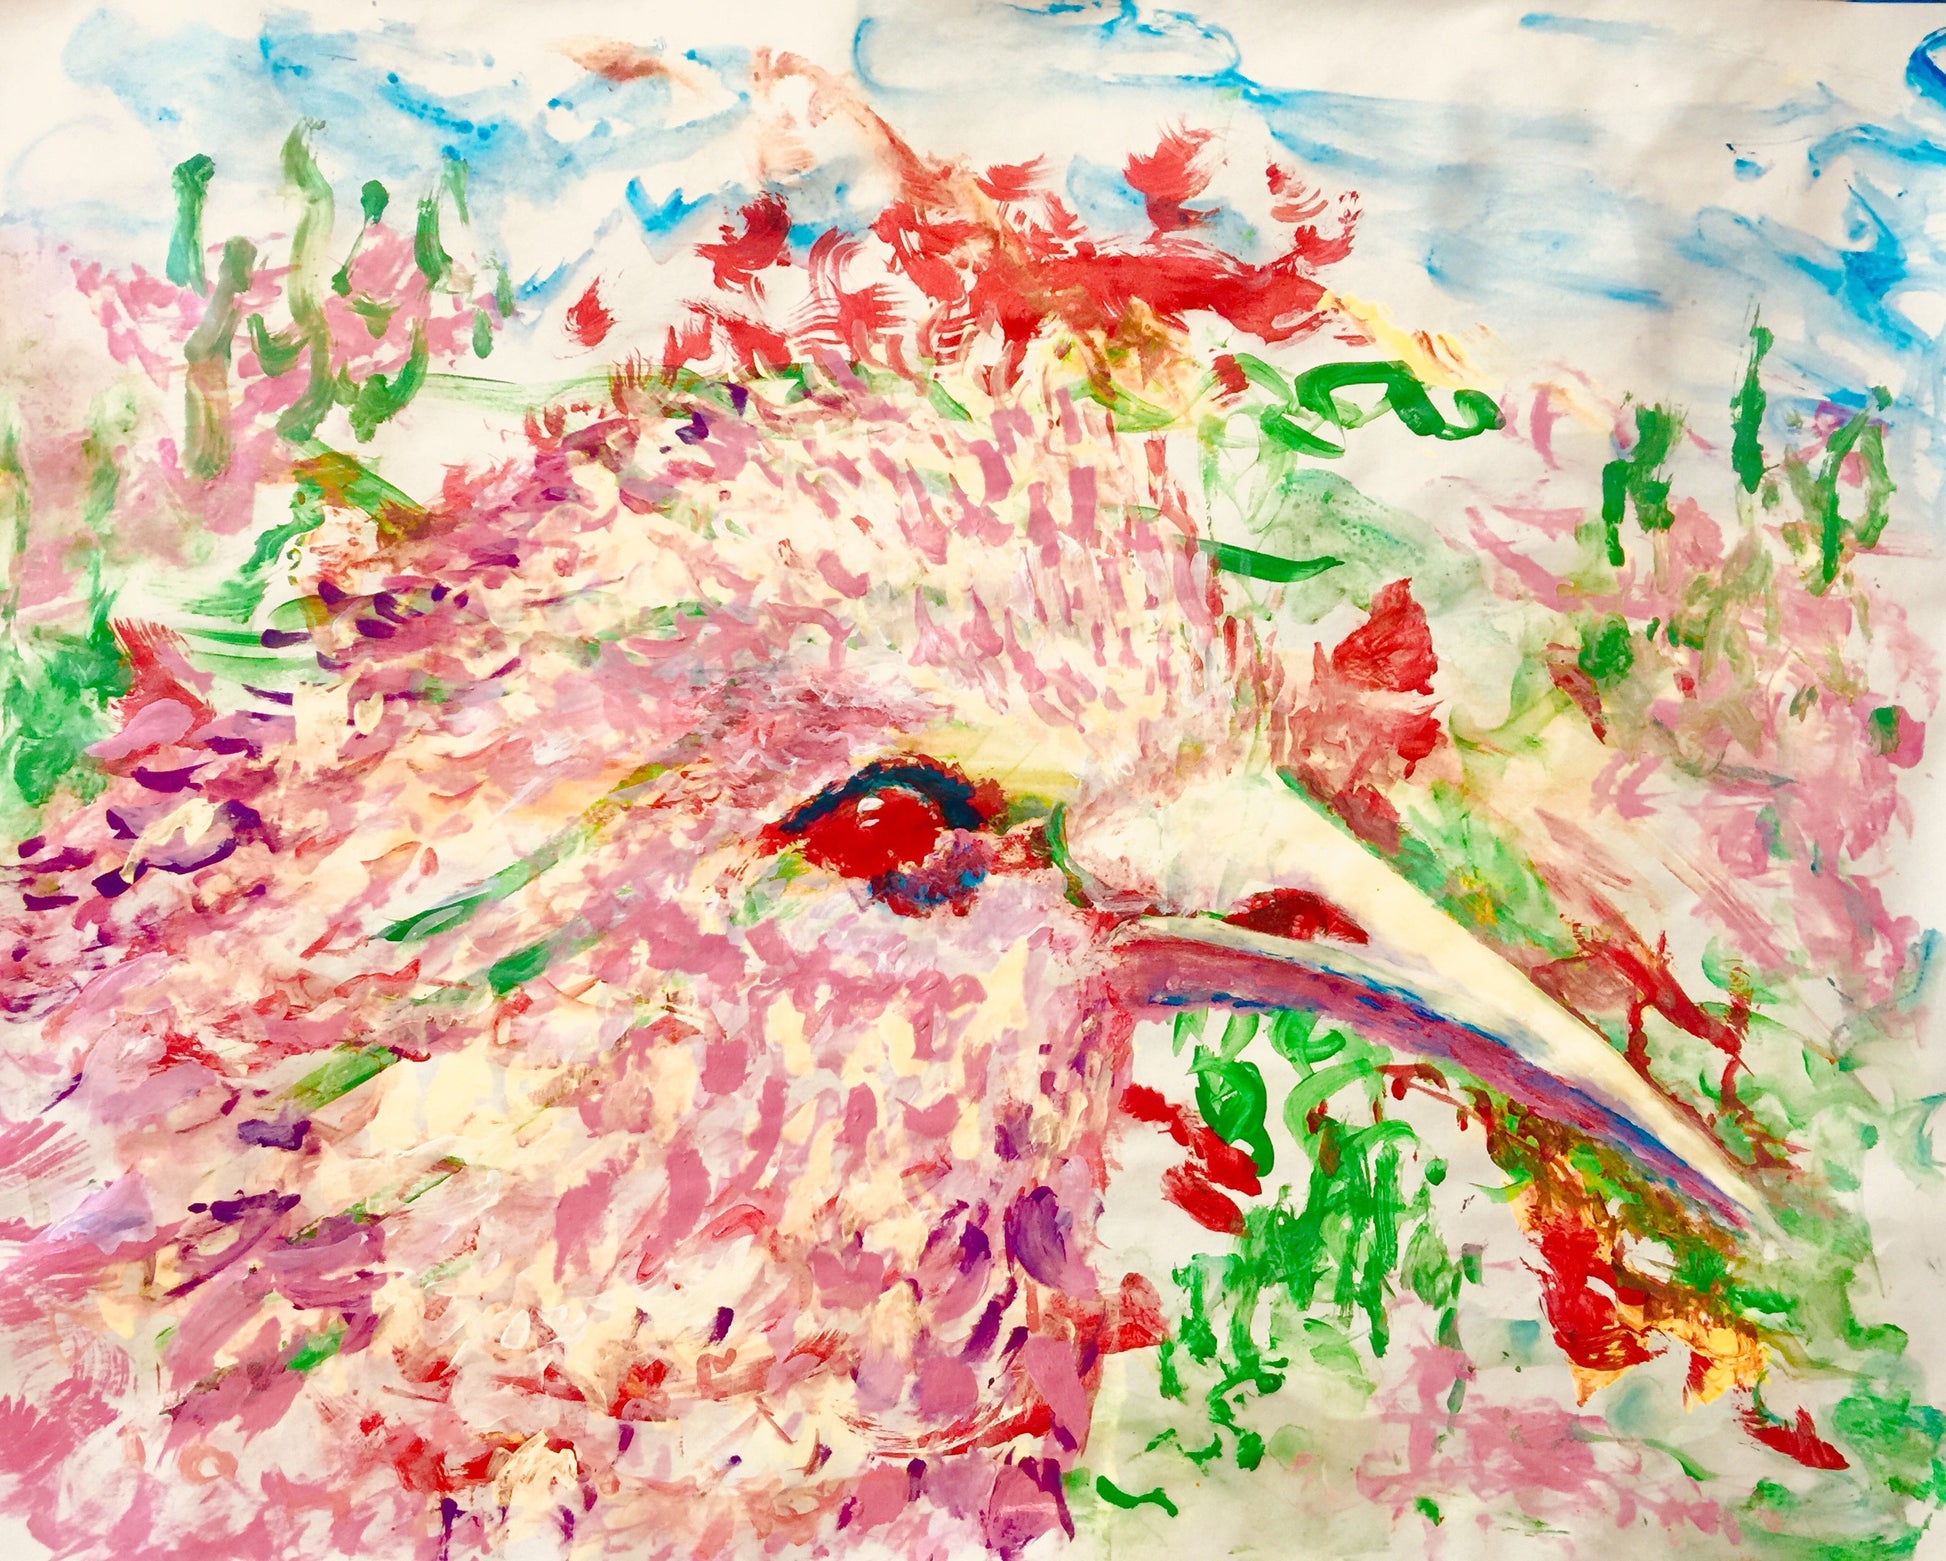 Parestoo - Sonarta.com It is spring time again and Parestoo is back. You look fabulous and those pink feathers make you appear so delicate.  This is an Acrylic on Paper painting by Shahla Rahimi Reynolds.  Parestoo is 19” W X 24” H.